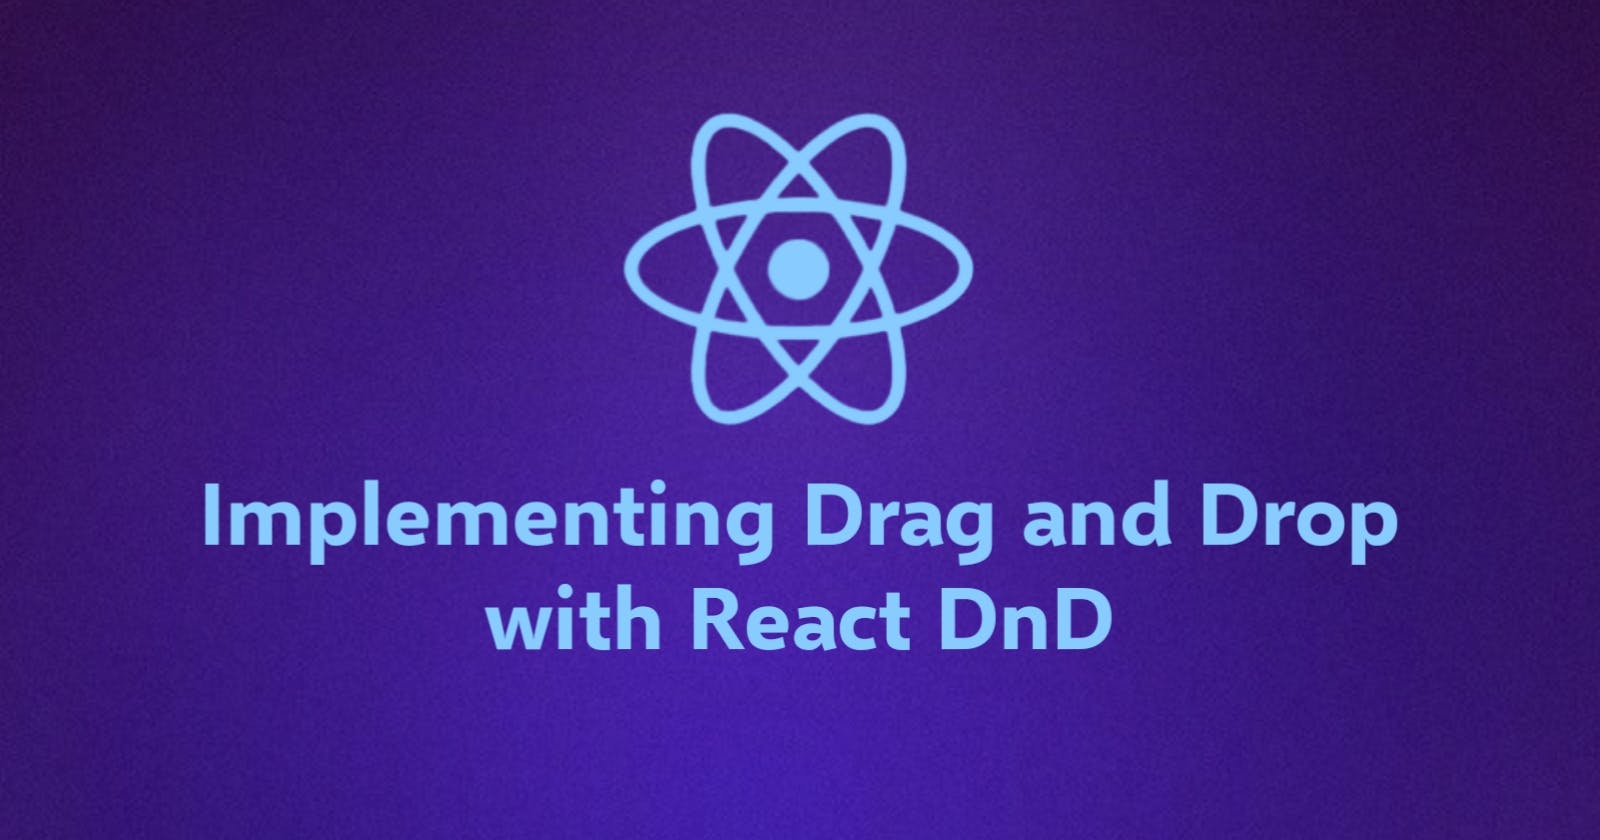 How to Implement Drag and Drop Functionality in React: An Easy Guide